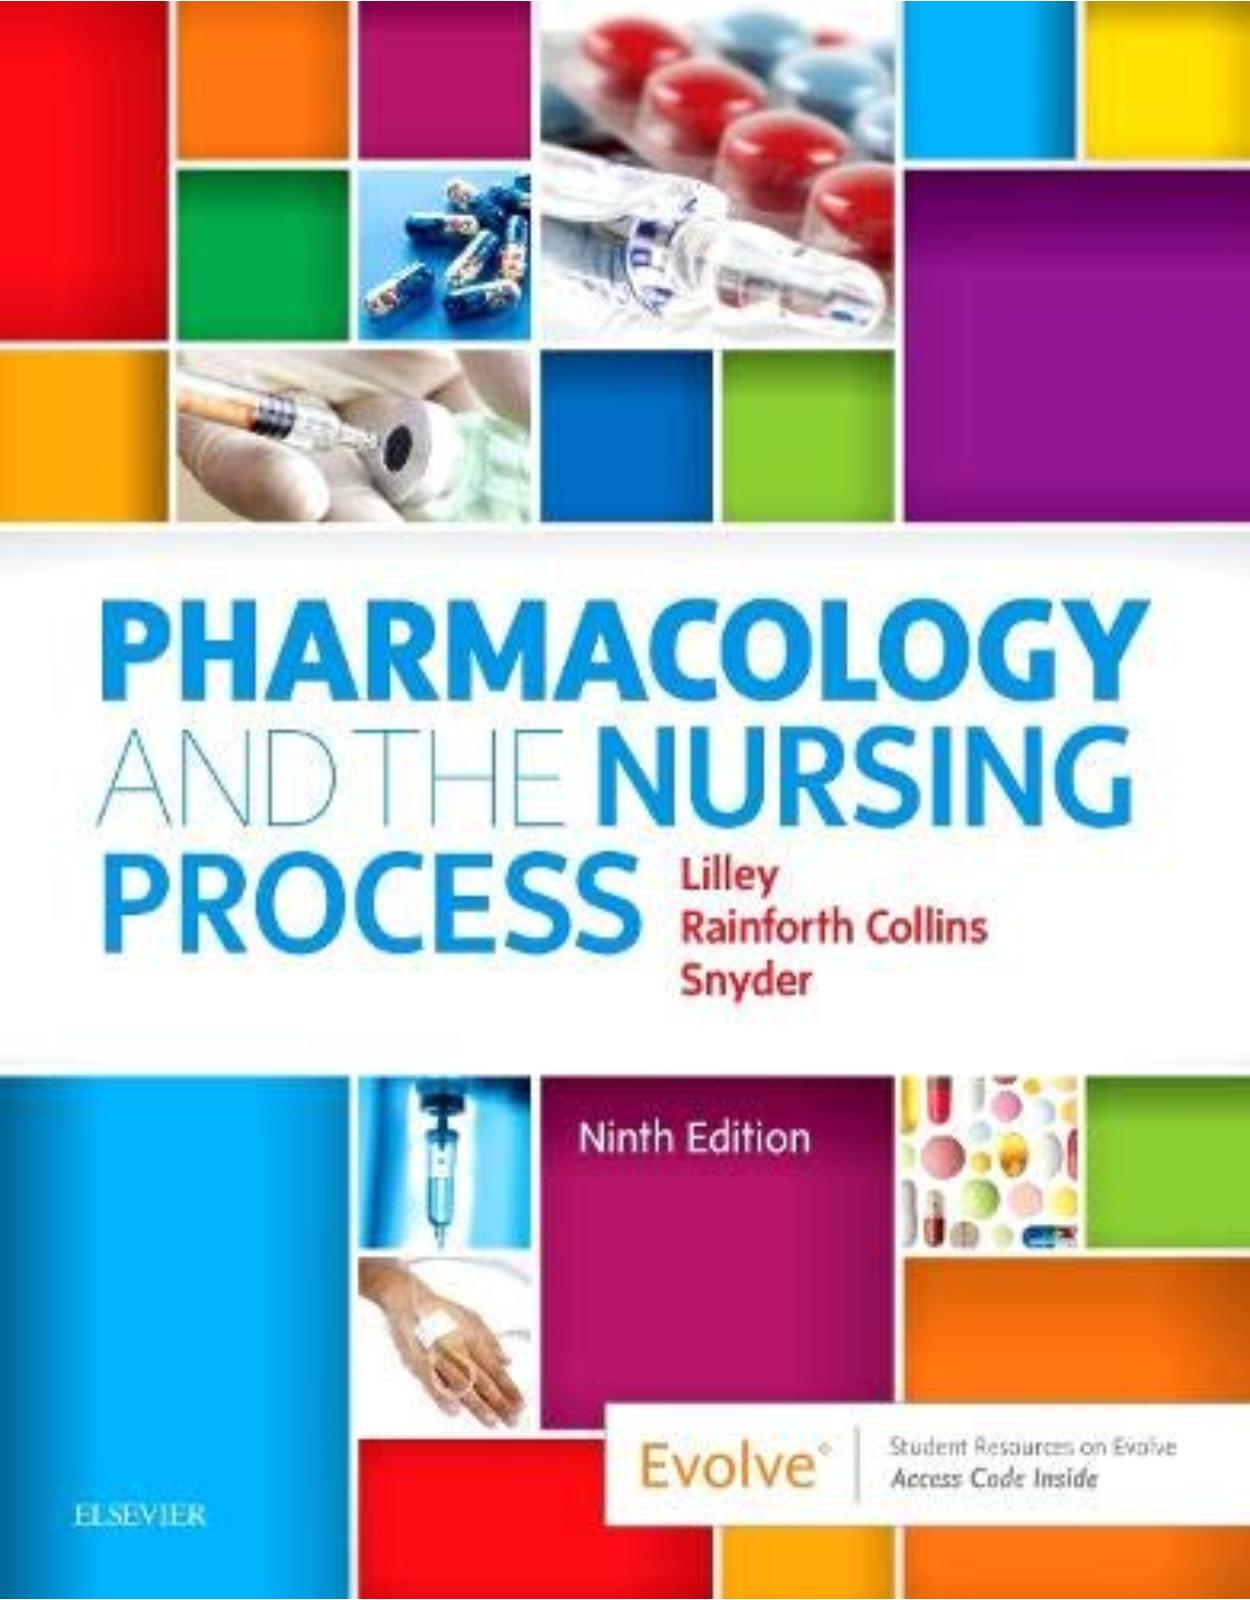 Pharmacology and the Nursing Process, 9e